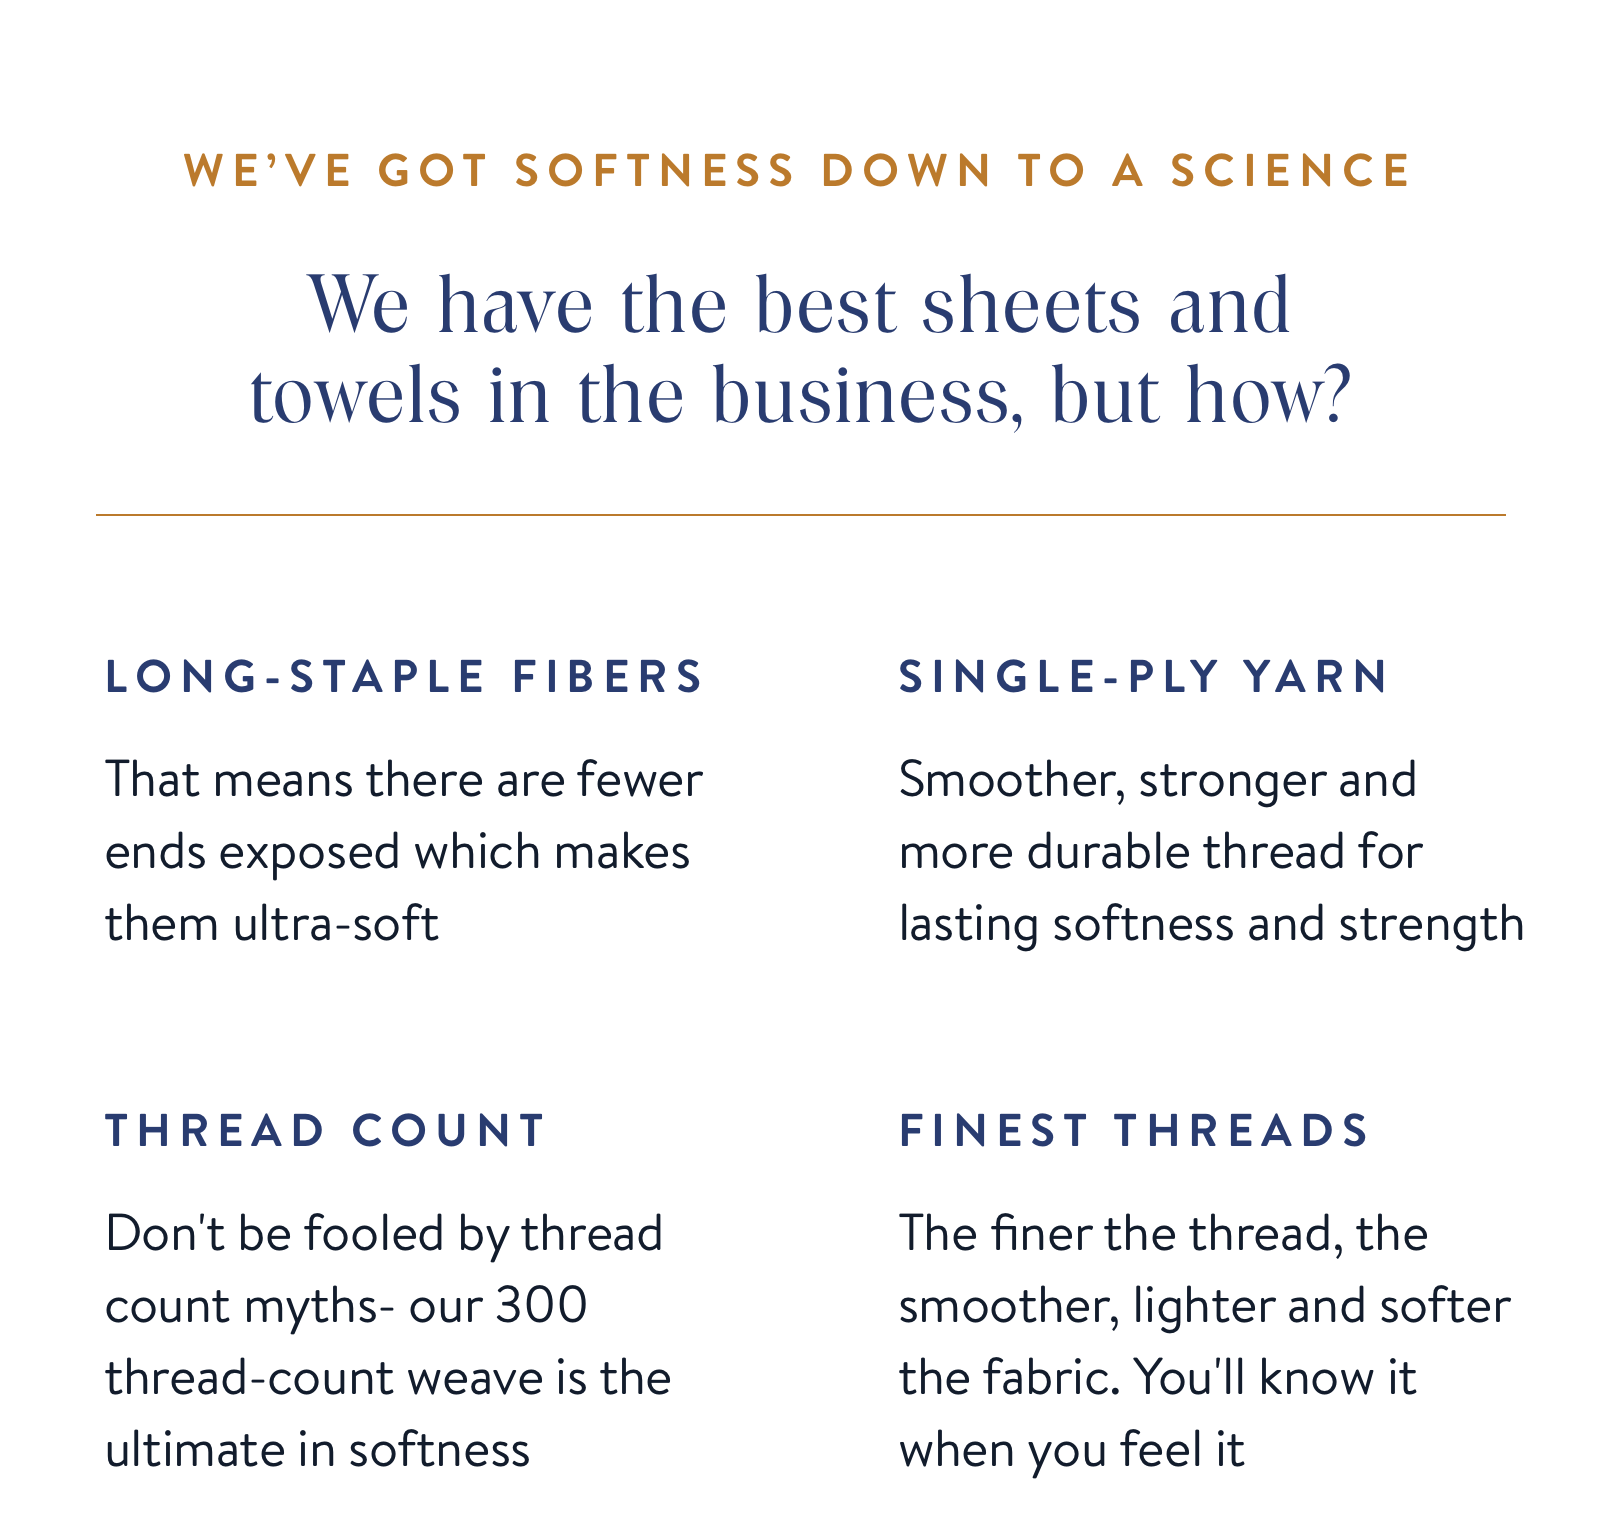 We have the best sheets and towels in the business, but how?